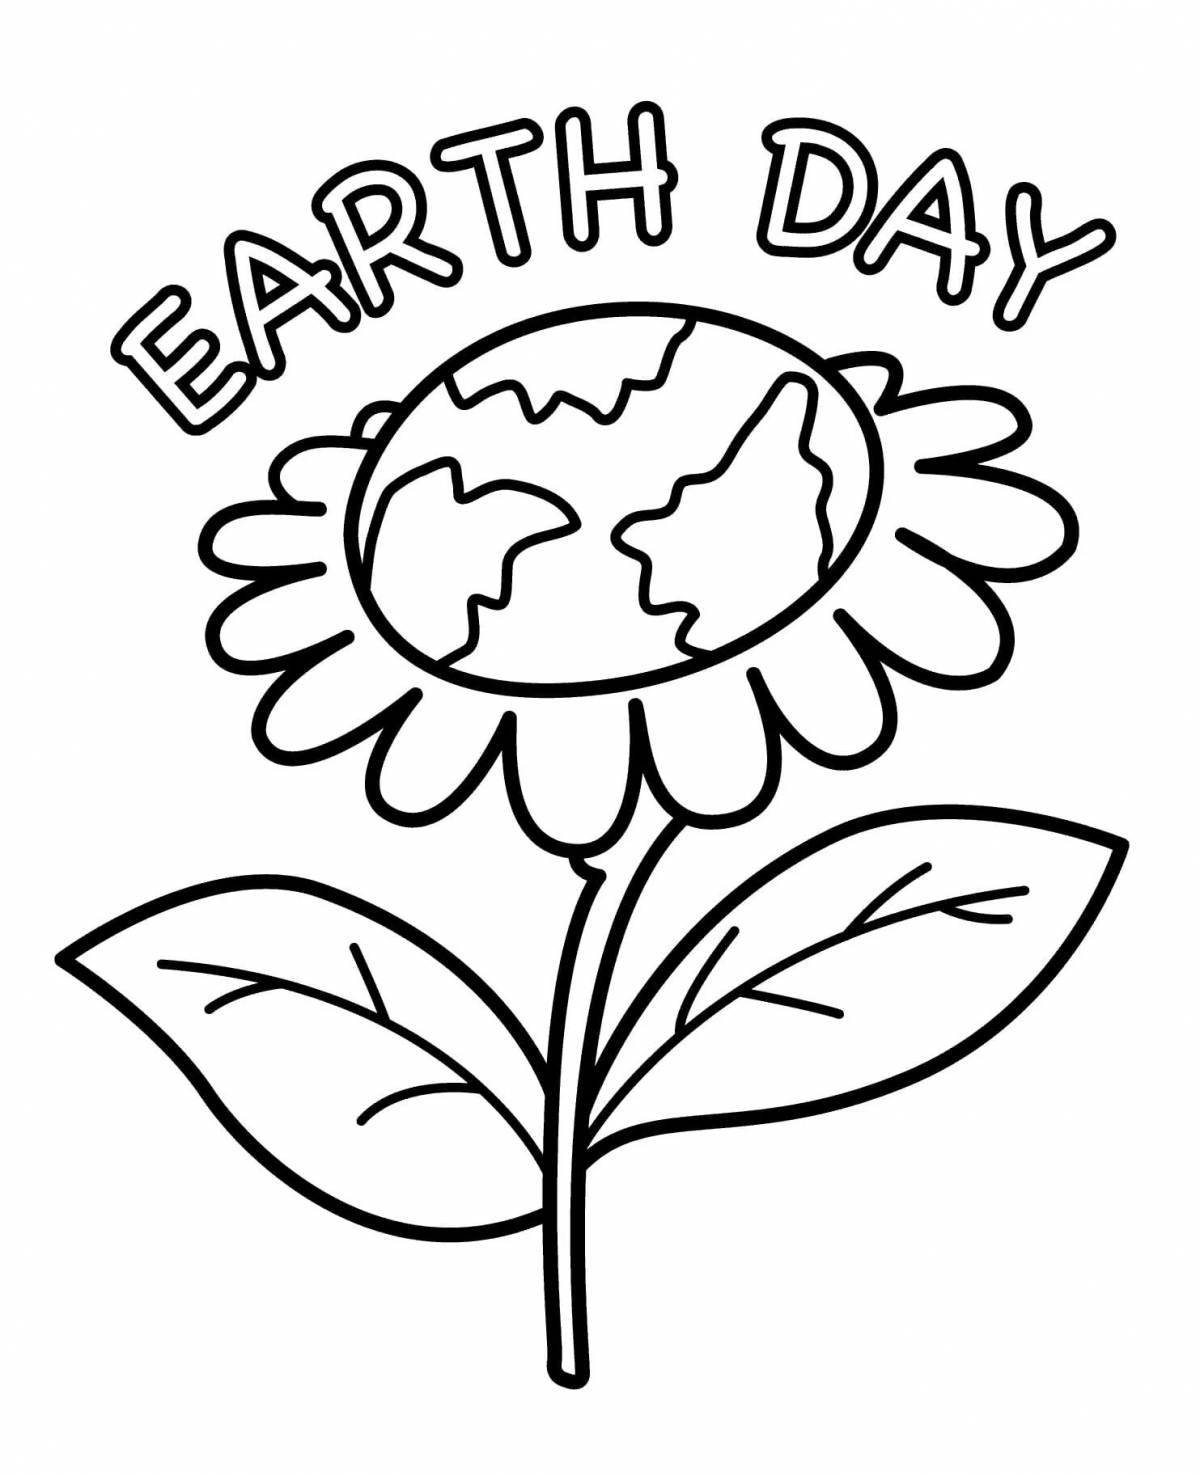 Brilliant global thank you day coloring pages